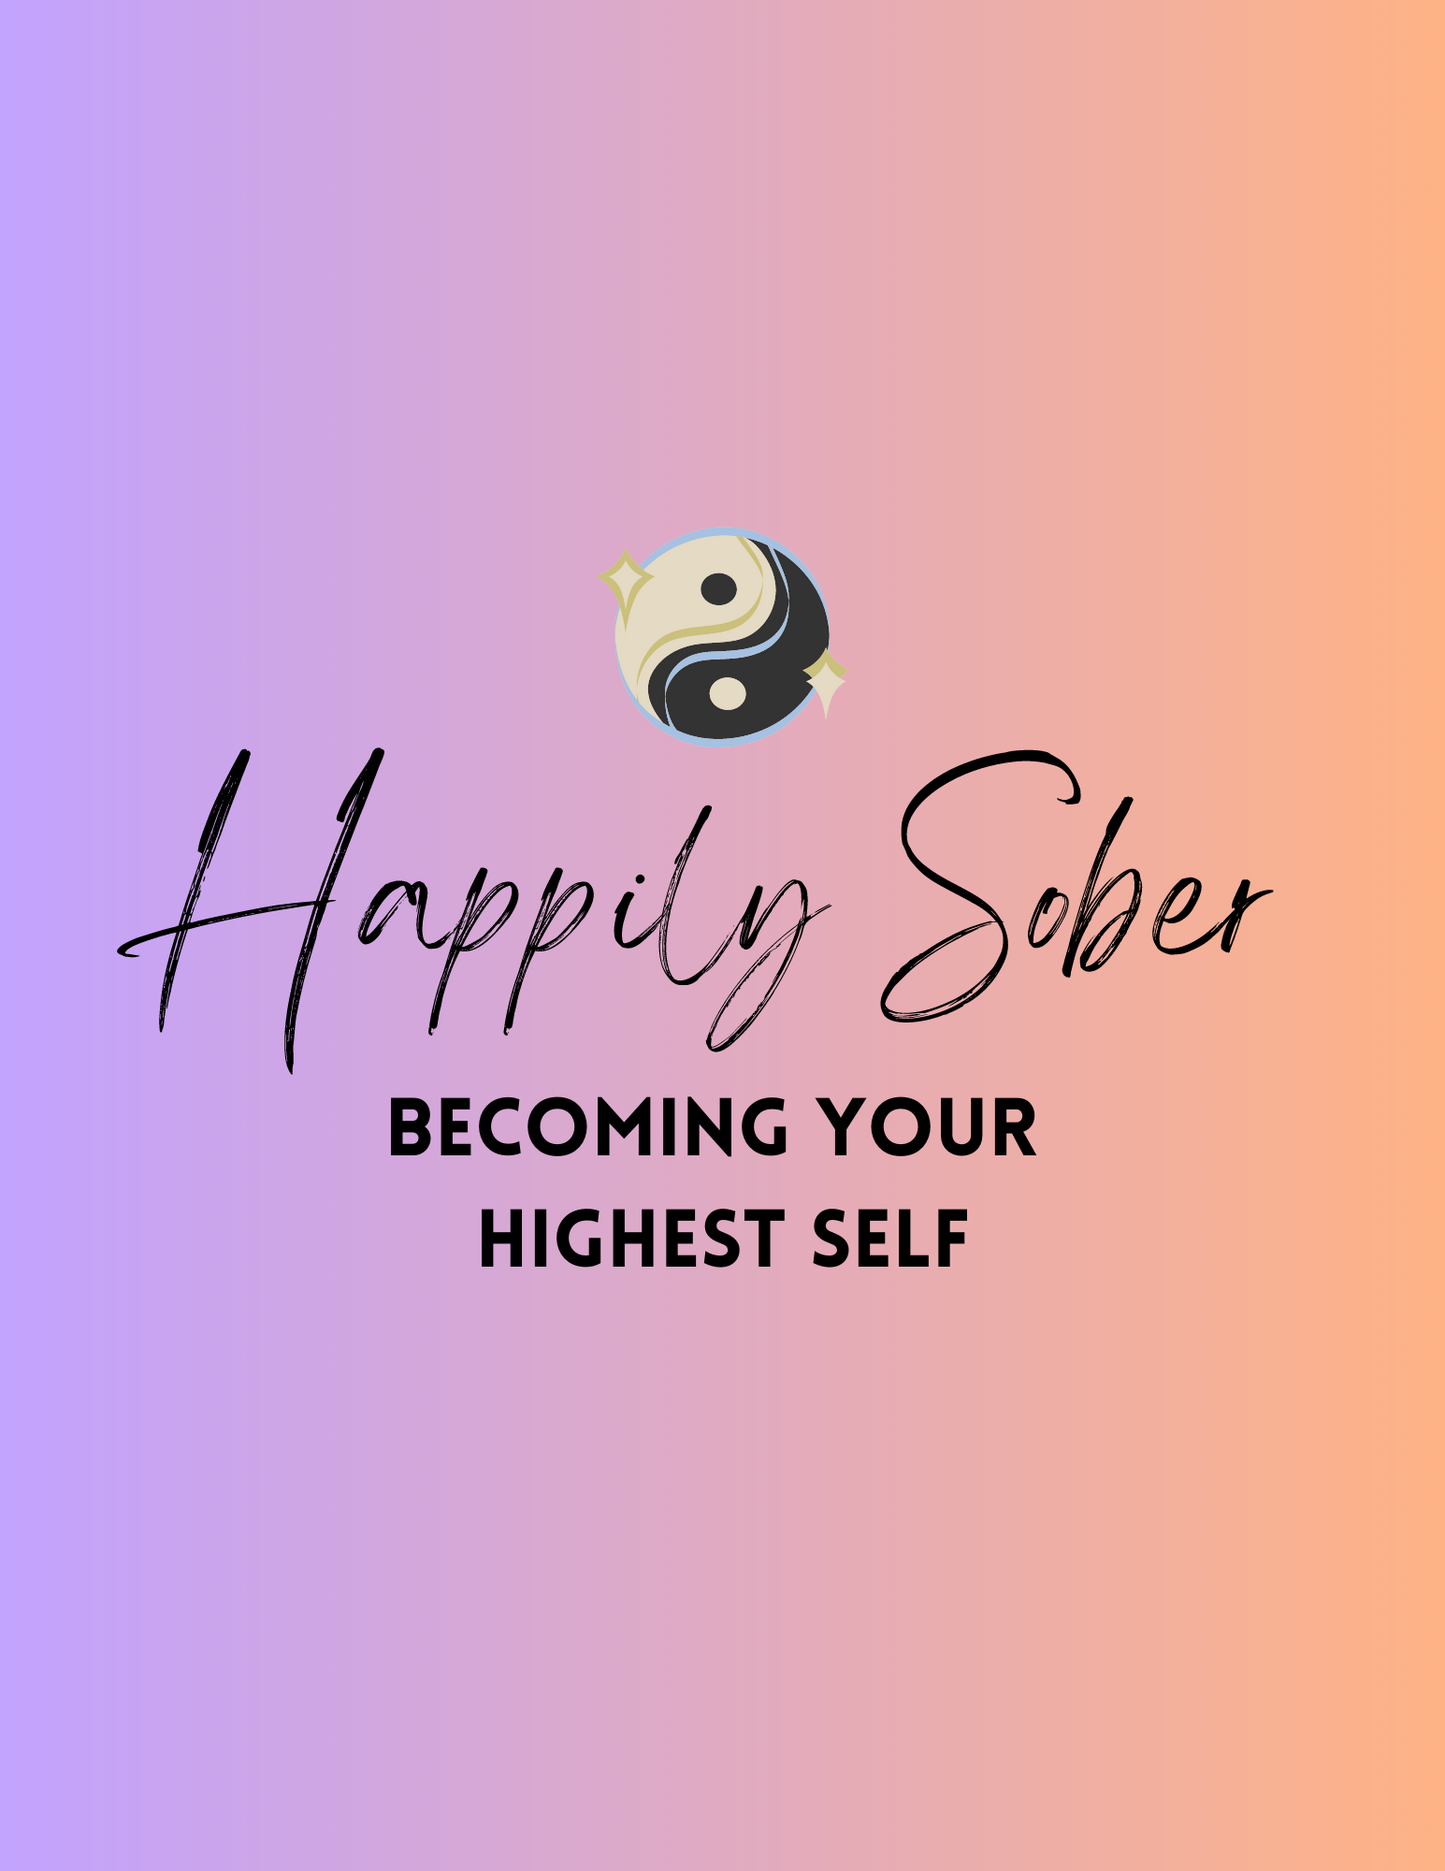 Happily Sober: Becoming Your Highest Self Online Course (Self-Paced)